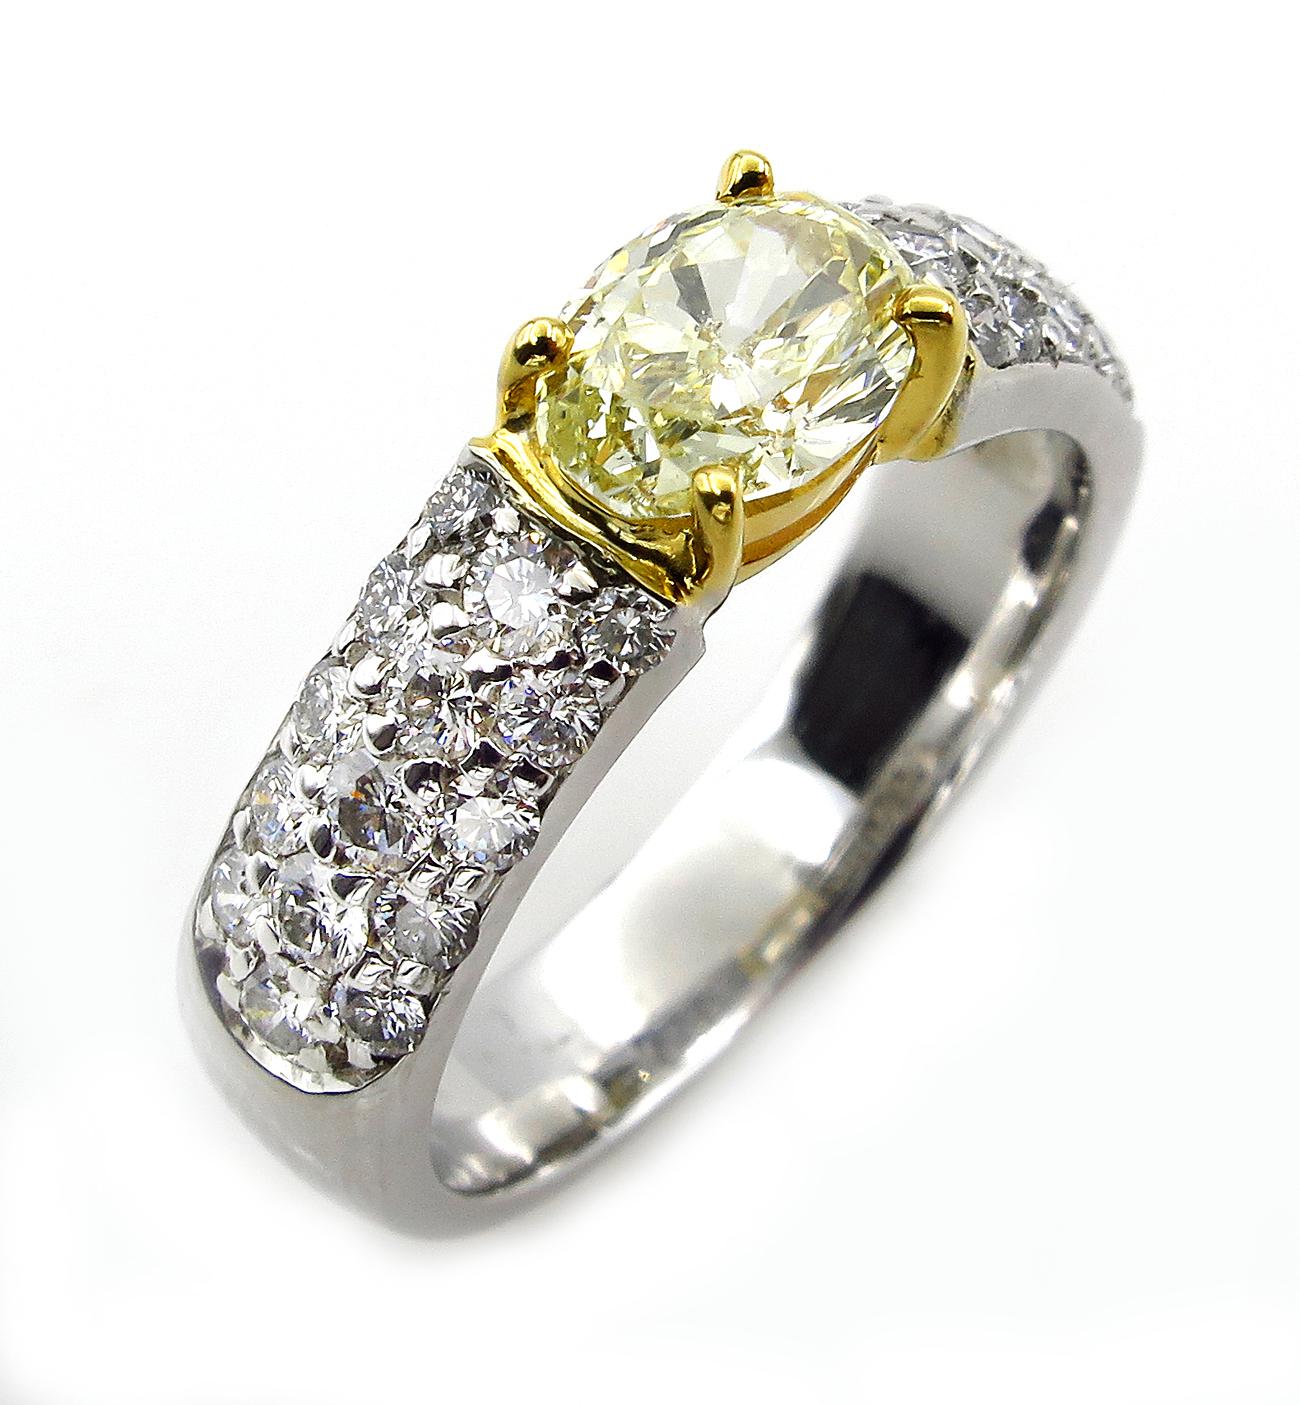 Oval Cut GIA 1.62 Carat Natural Fancy Yellow Oval Diamond Engagement Ring Pave Platinum